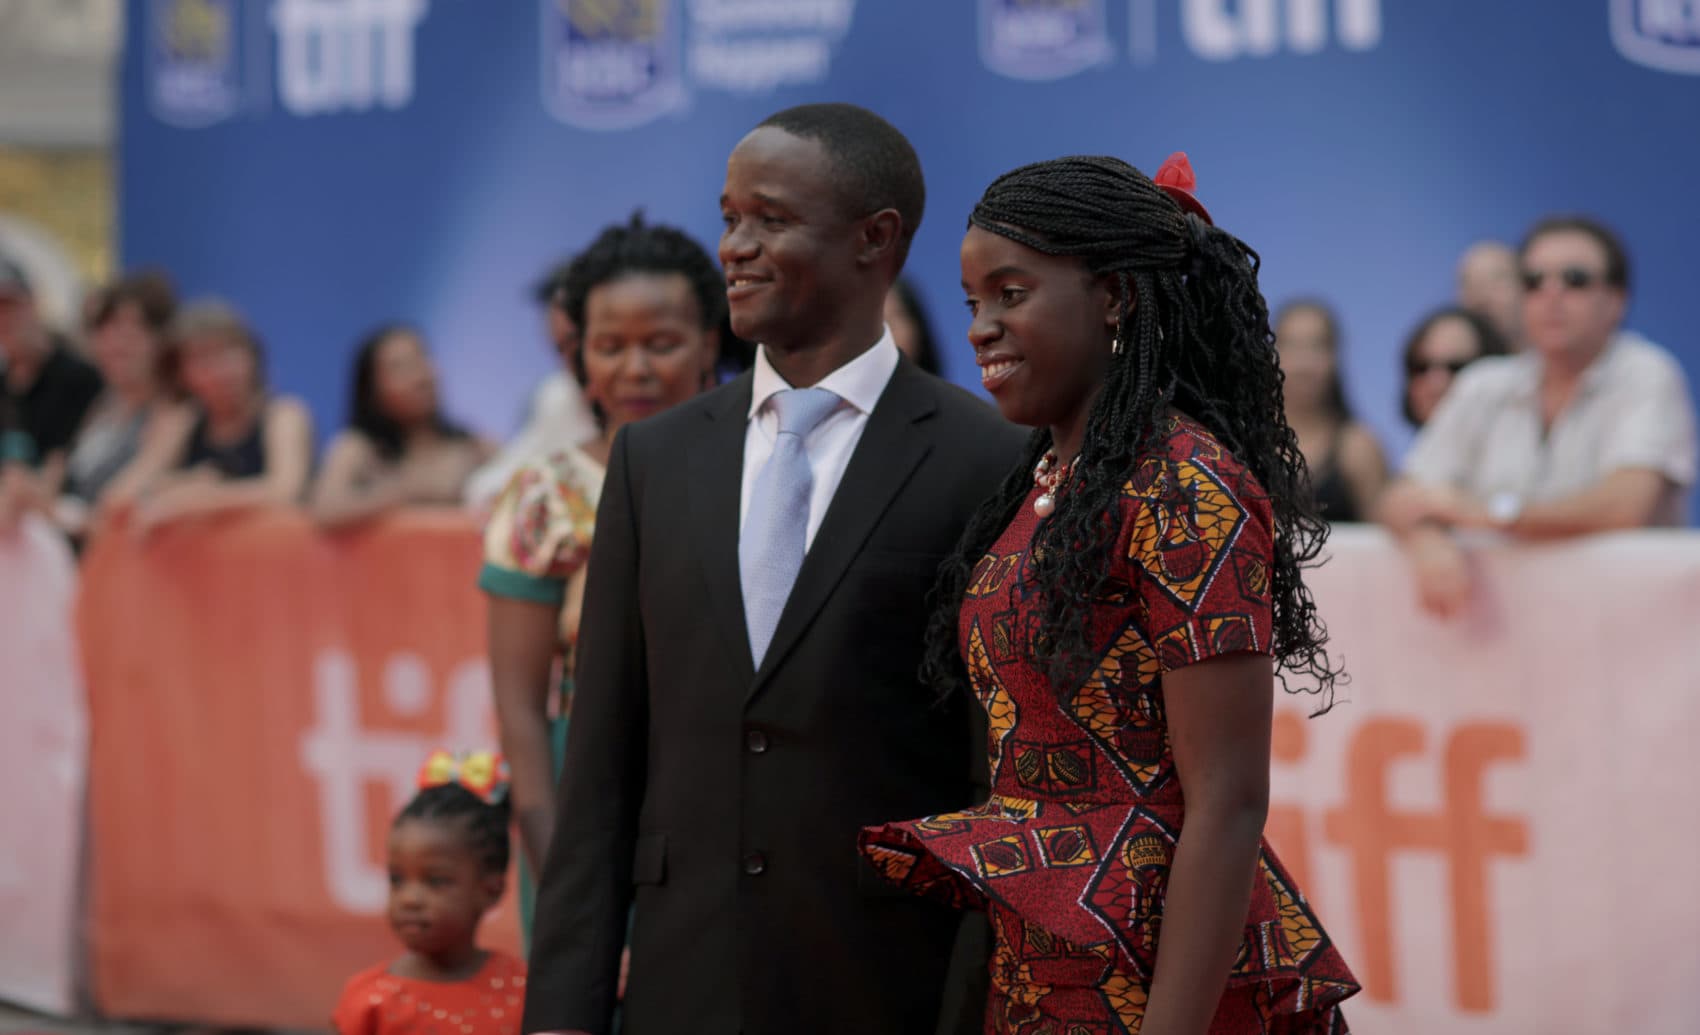 Phiona Mutesi and her coach, Robert Katende, at the Toronto International Film Festival in 2016. (Jesse Herzog/Invision/AP)